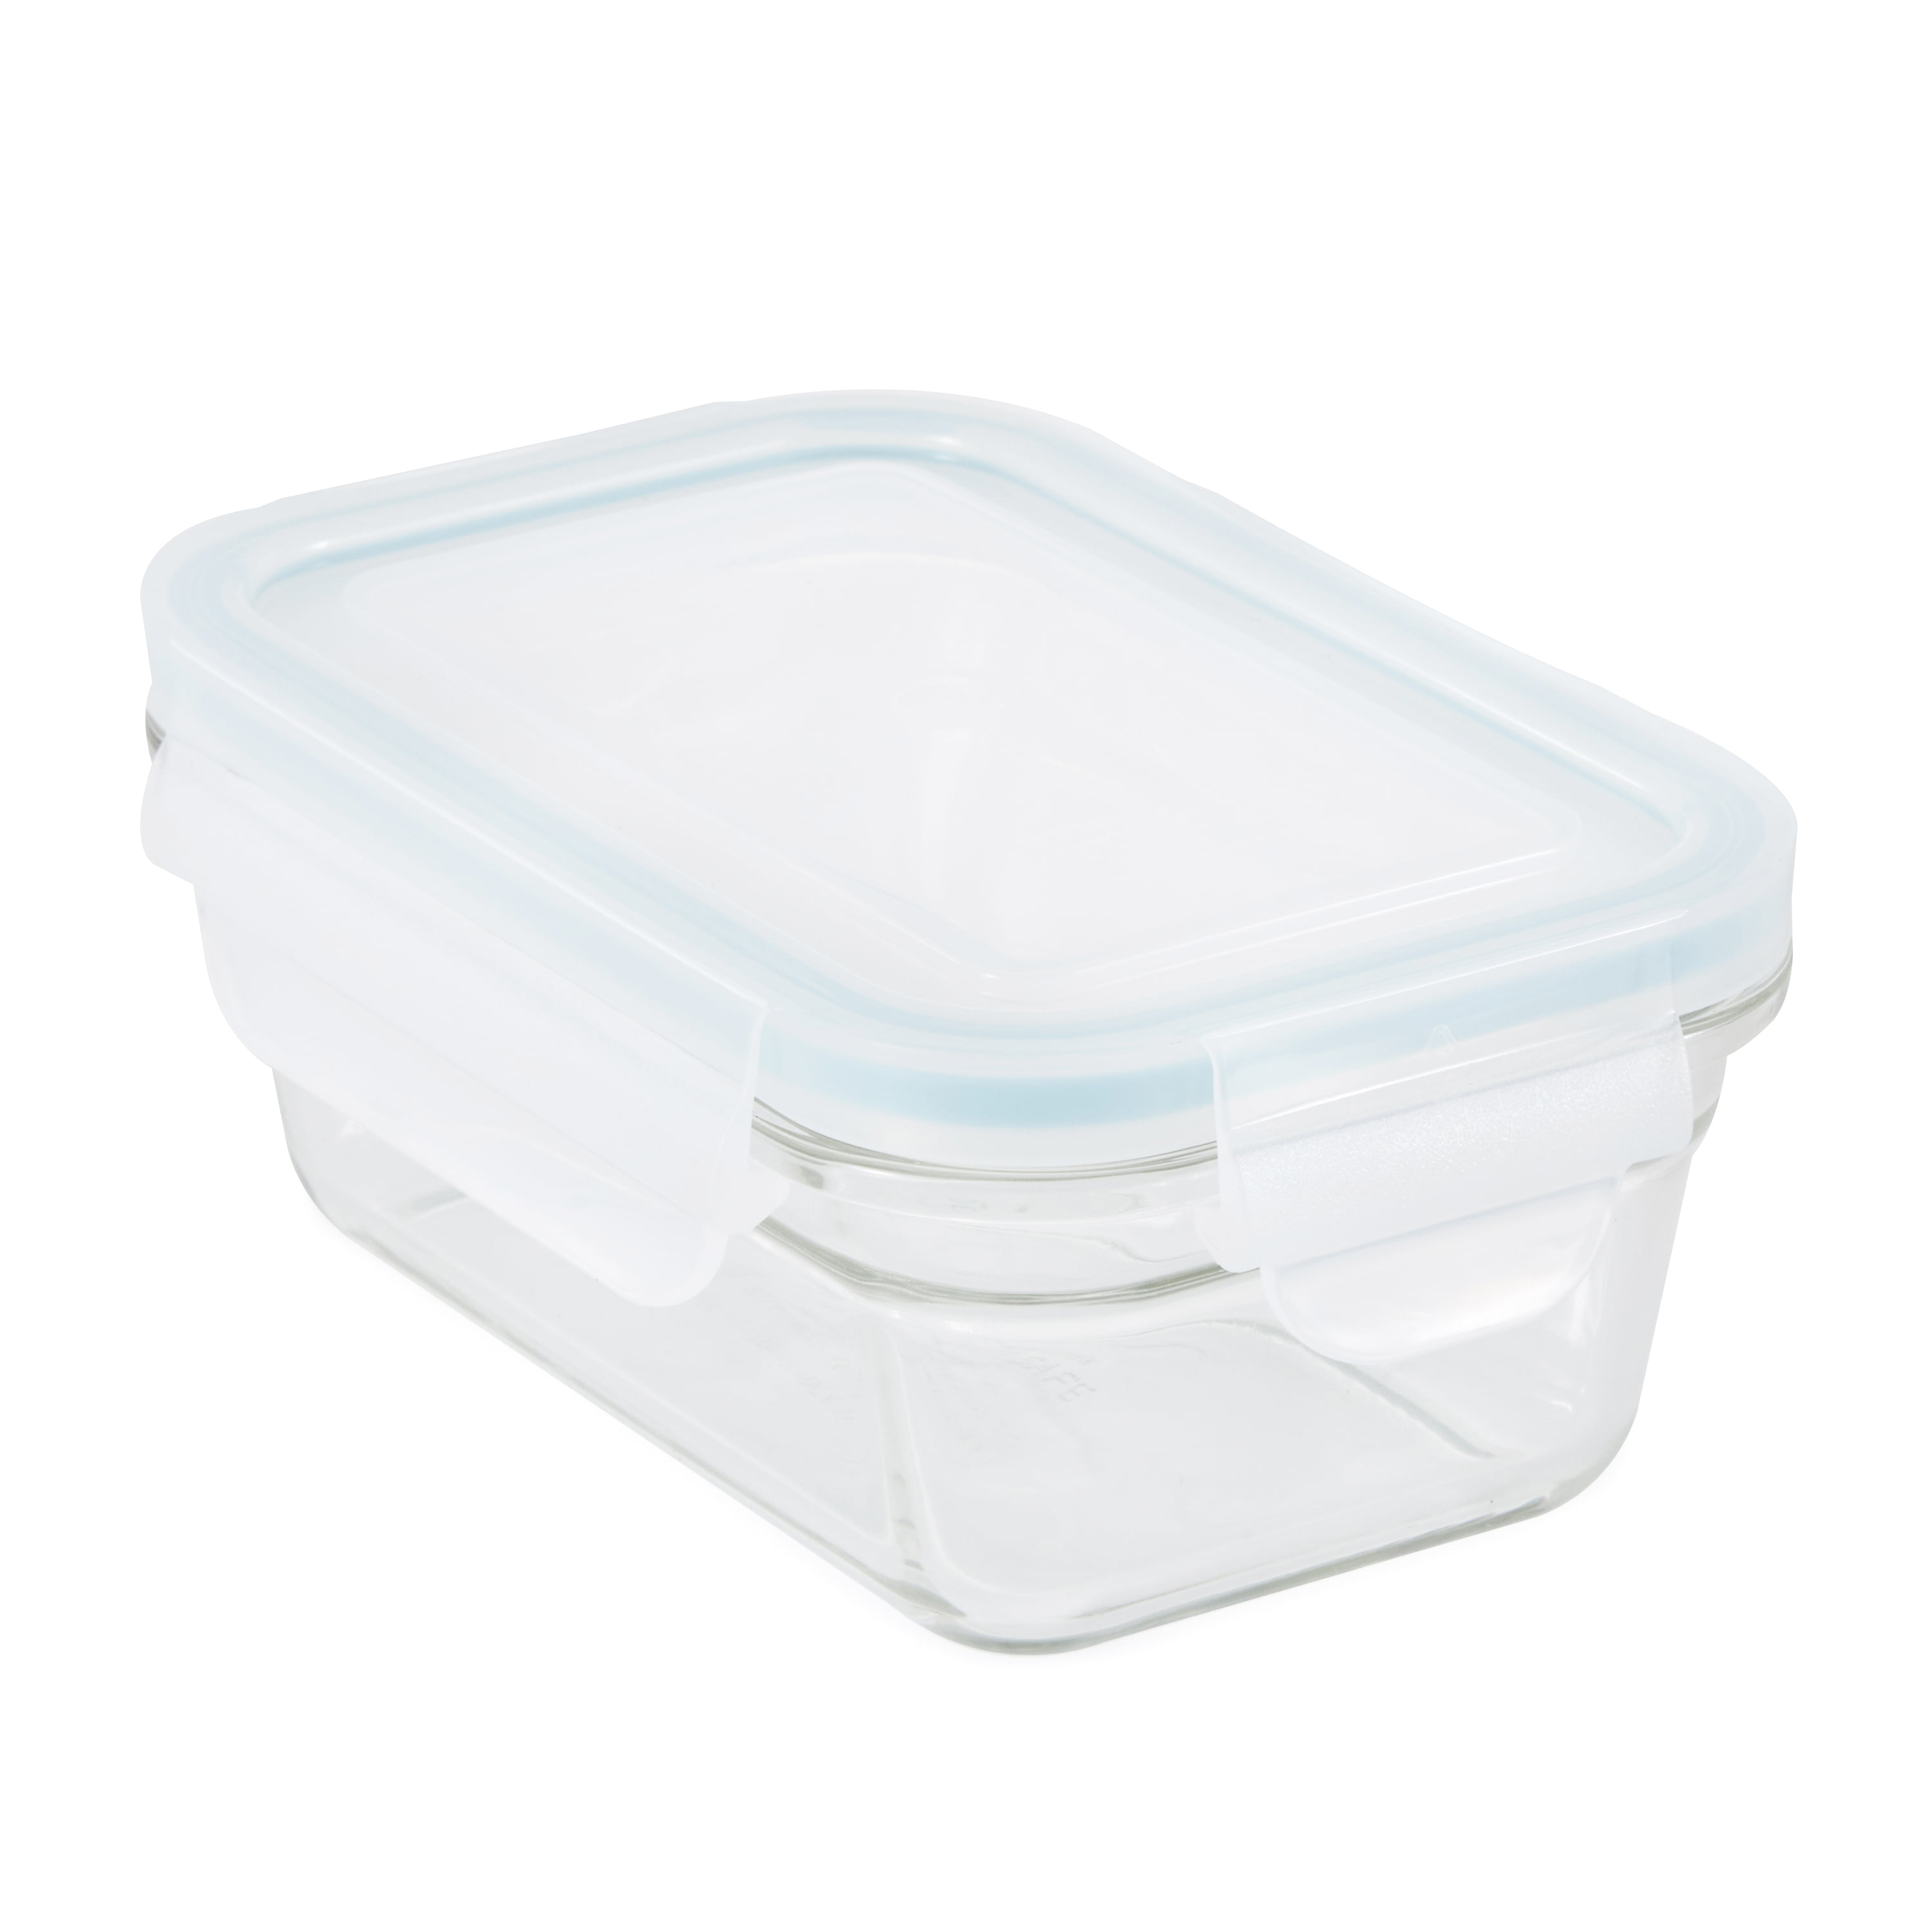 Oven Safe Glass Food Storage Container Set with Plastic Lids - 4 Pack, 4 PC  - Kroger